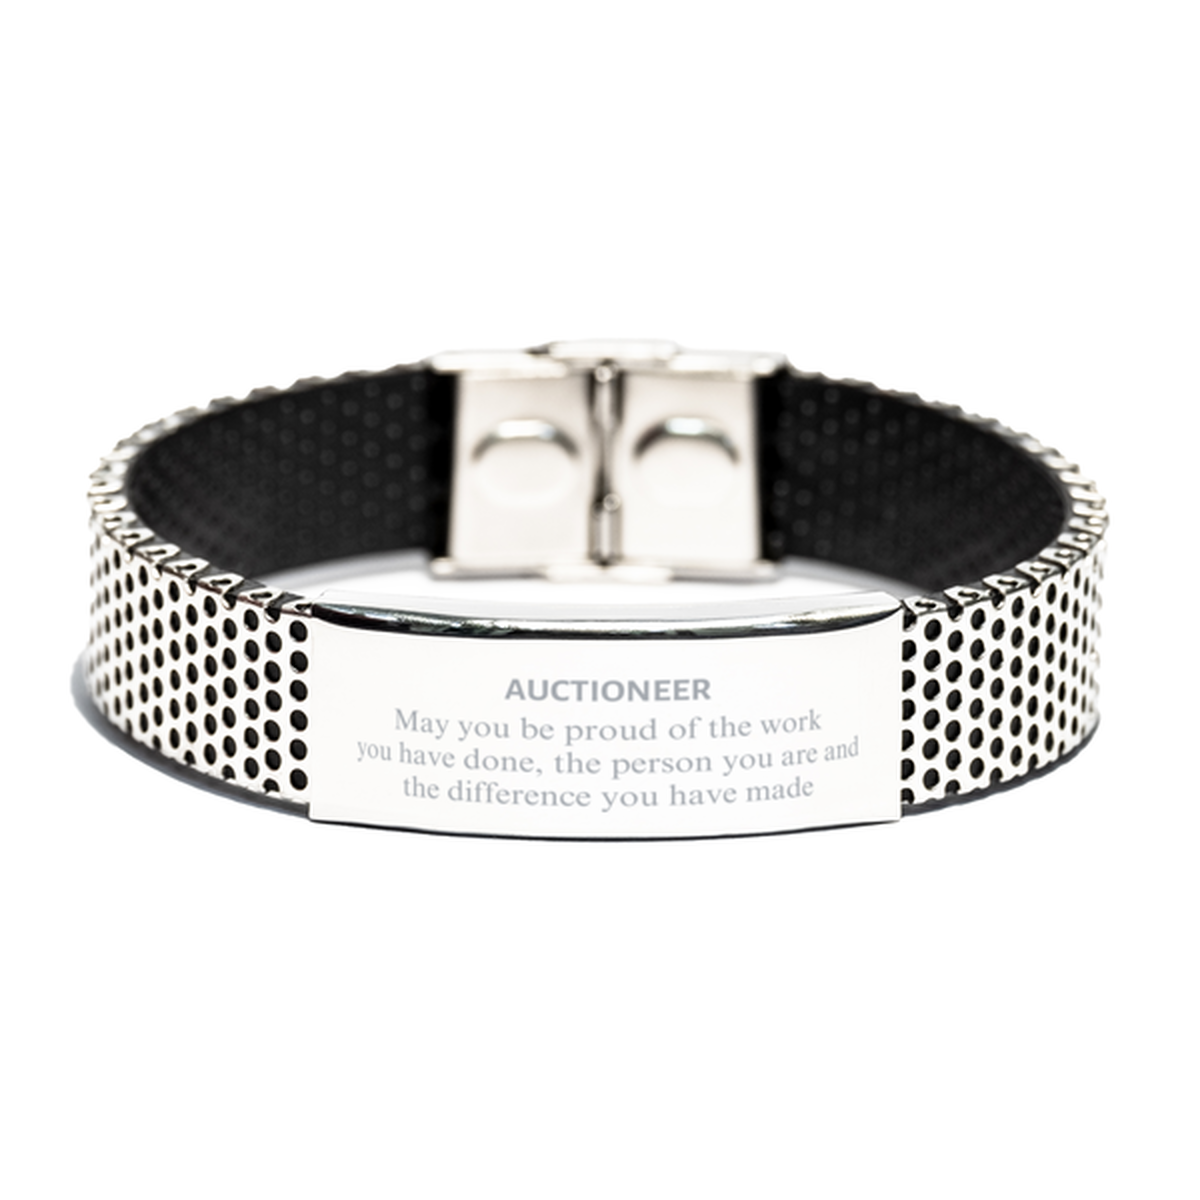 Auctioneer May you be proud of the work you have done, Retirement Auctioneer Stainless Steel Bracelet for Colleague Appreciation Gifts Amazing for Auctioneer